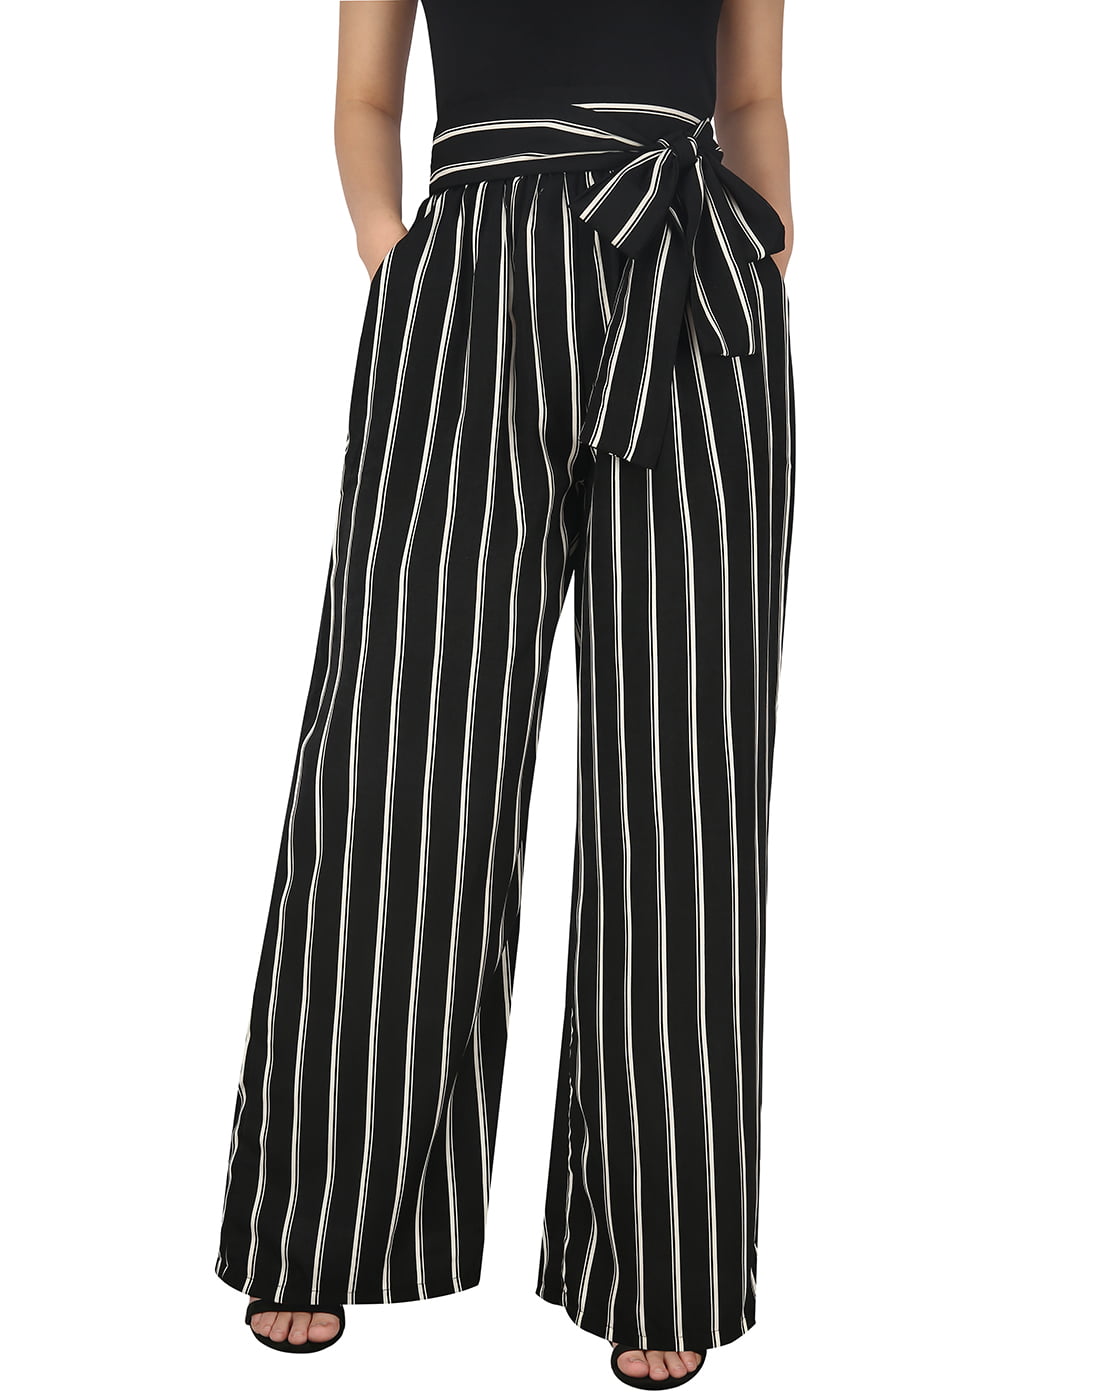 Women Ladies Flared Wide Leg Pants Palazzo High Waist Cropped Trousers Plus Size